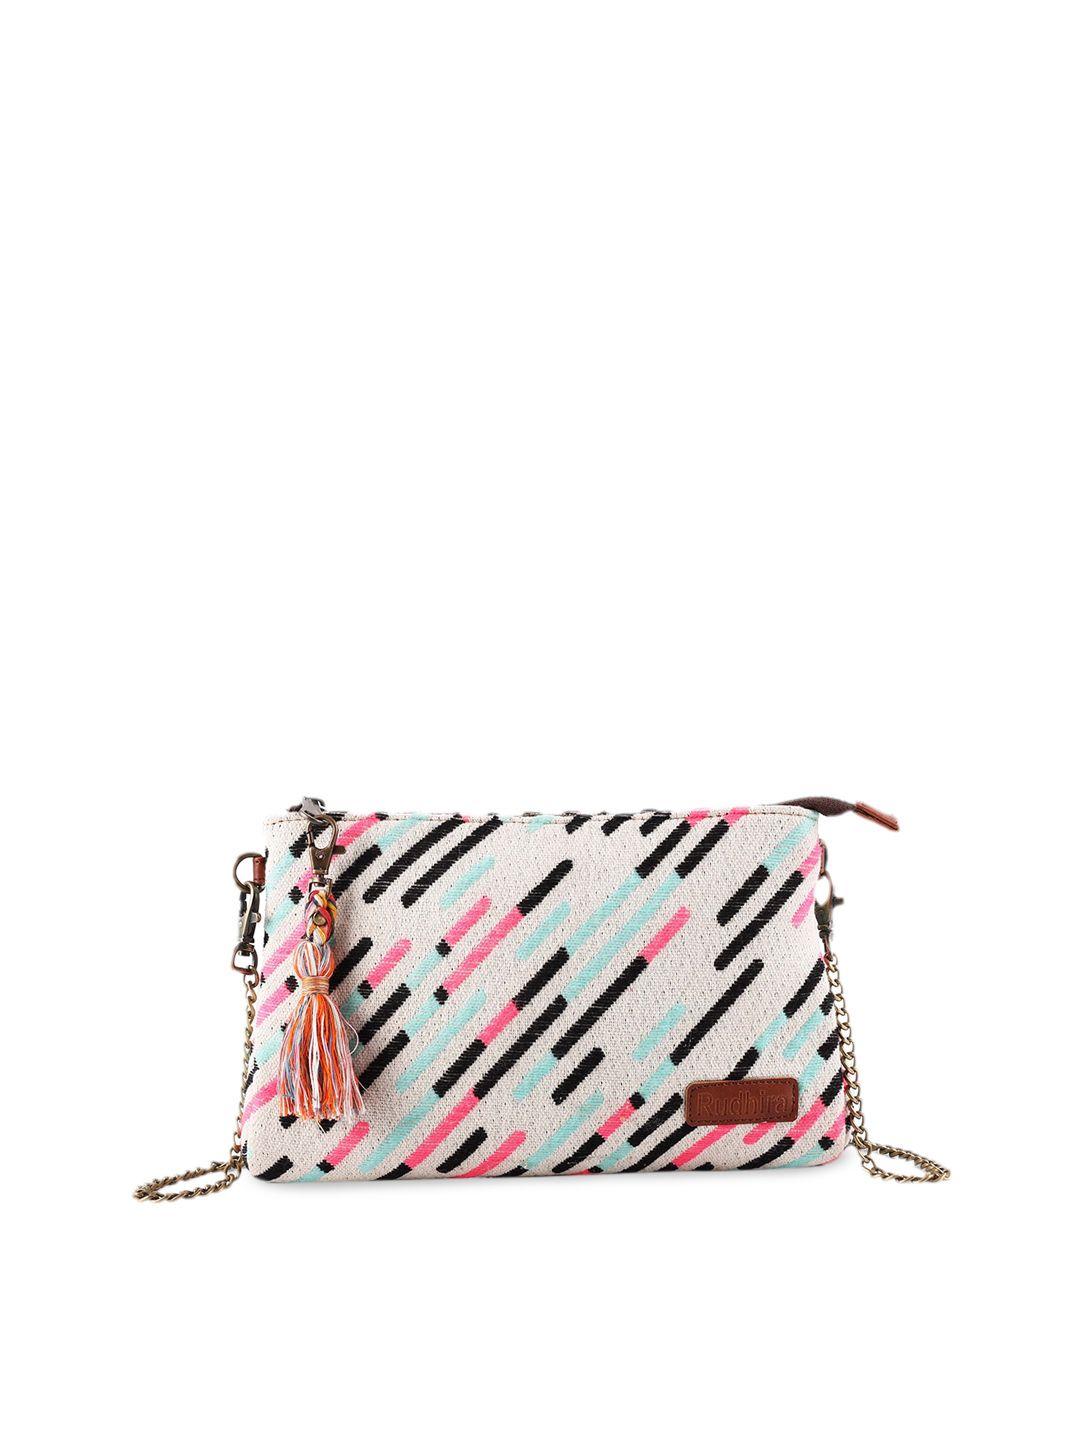 rudhira striped structured sling bag with tasselled